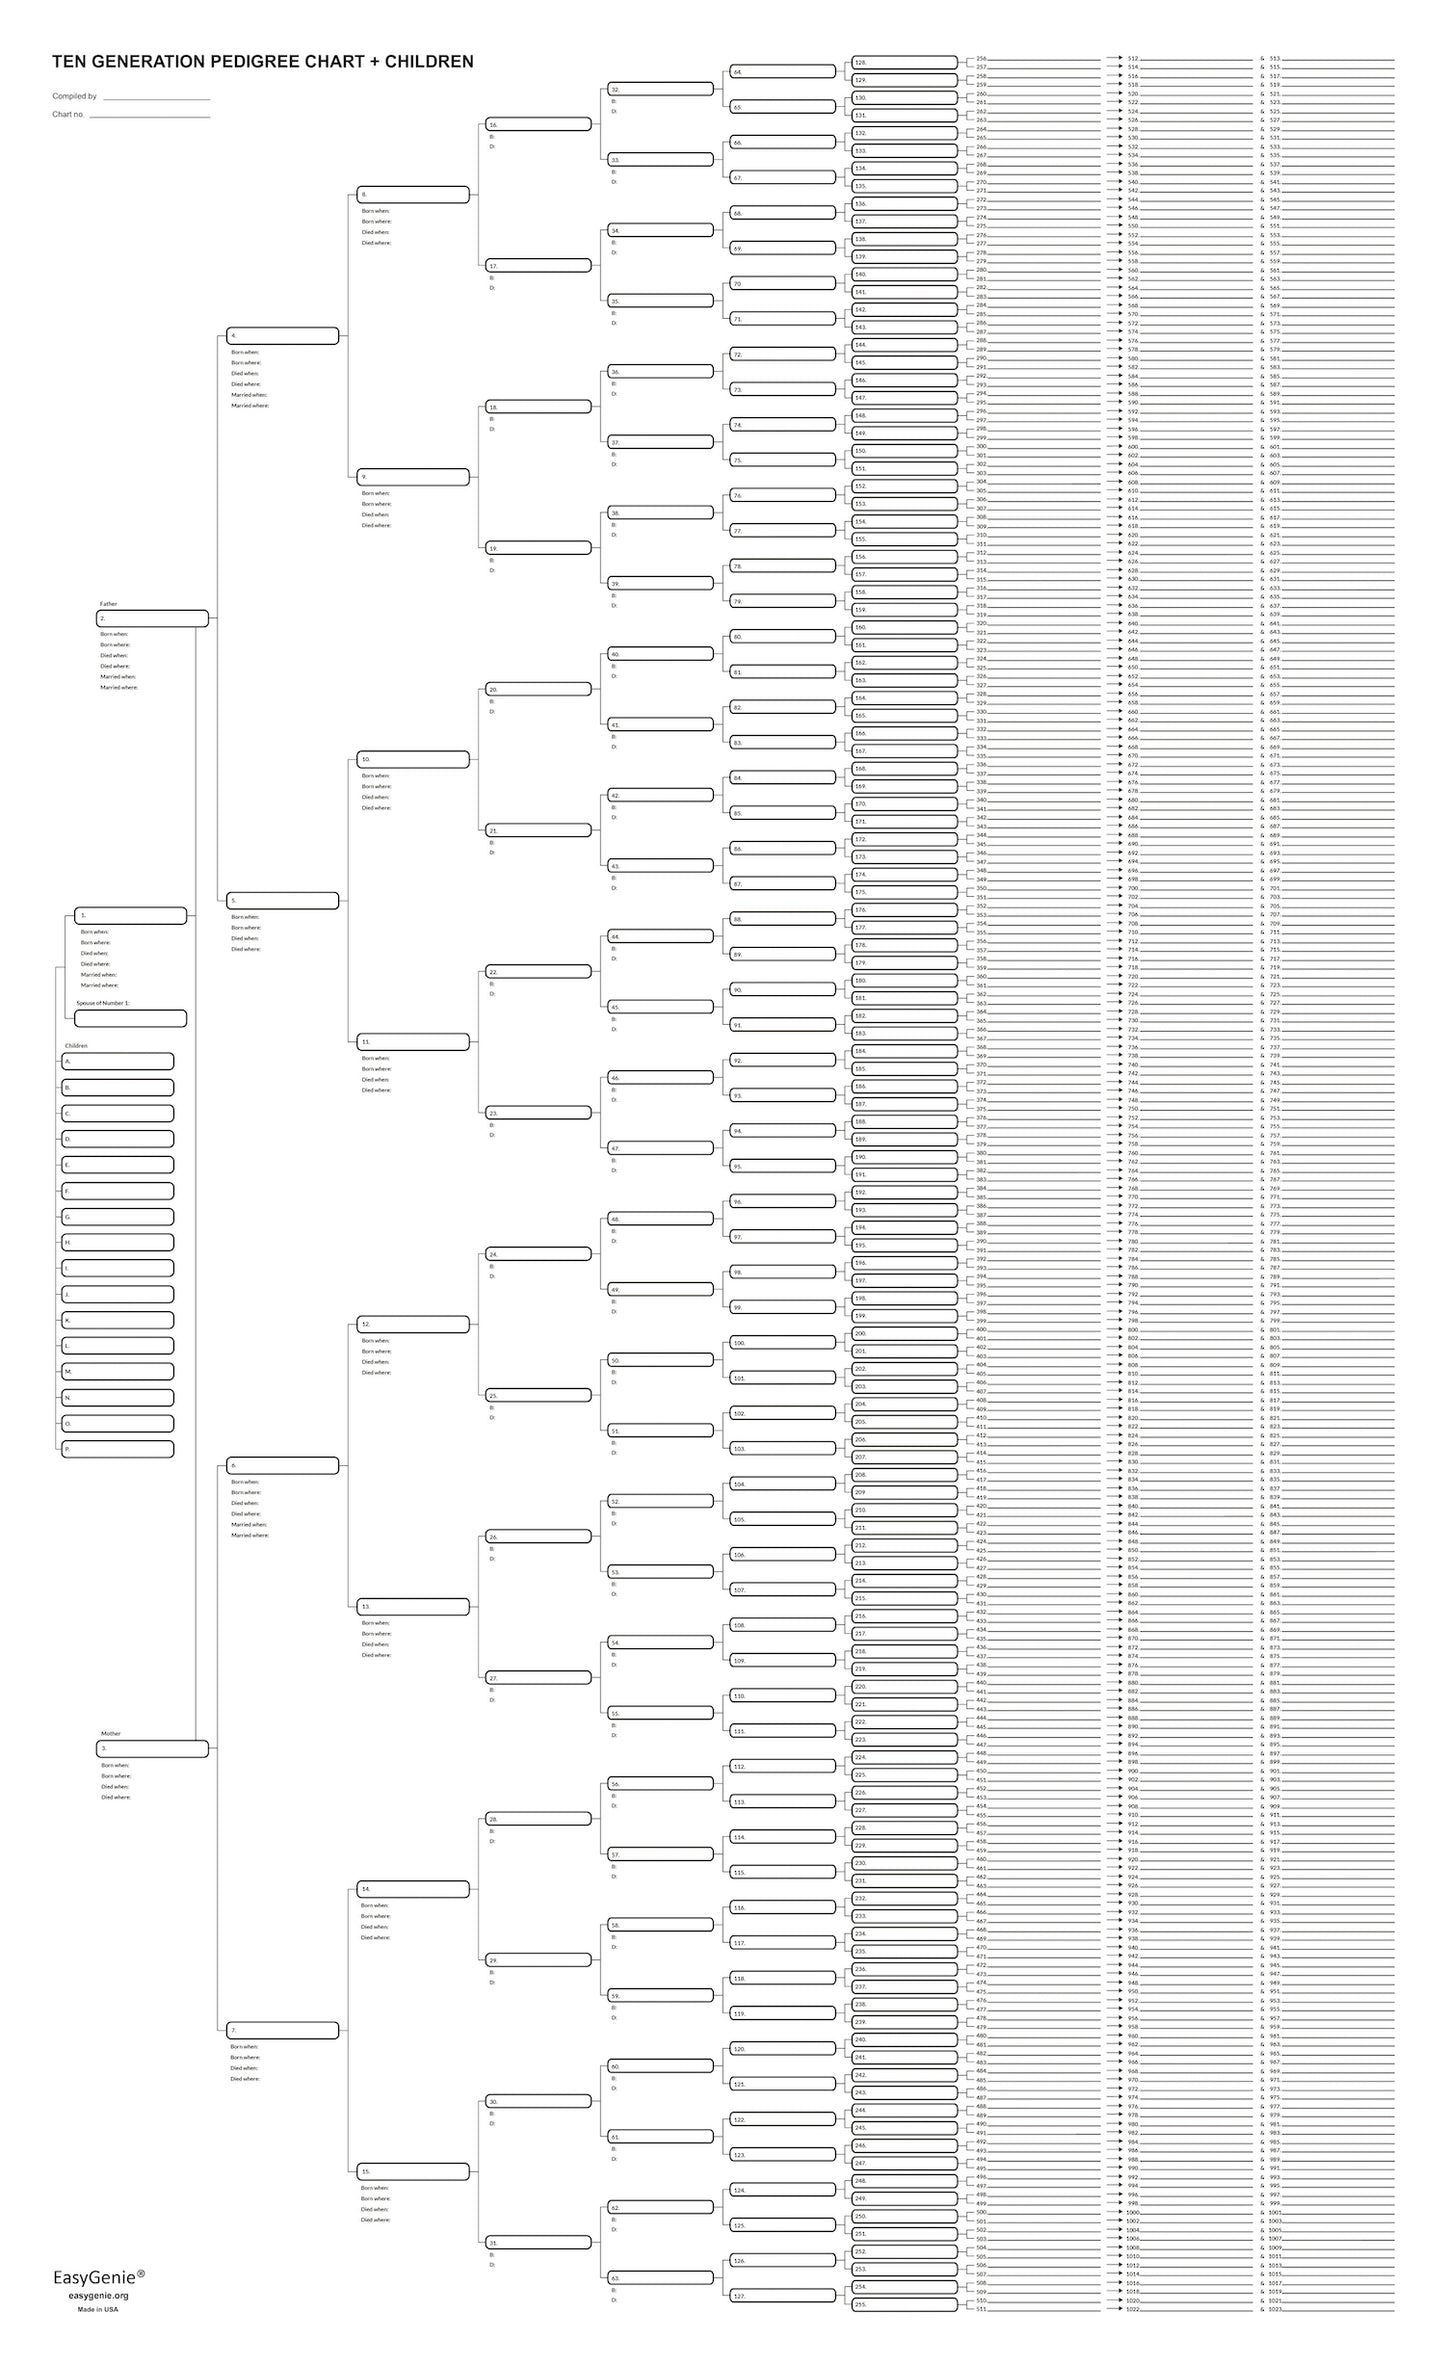 Generations Chart - map 10 generations of ancestry (3 sheets)